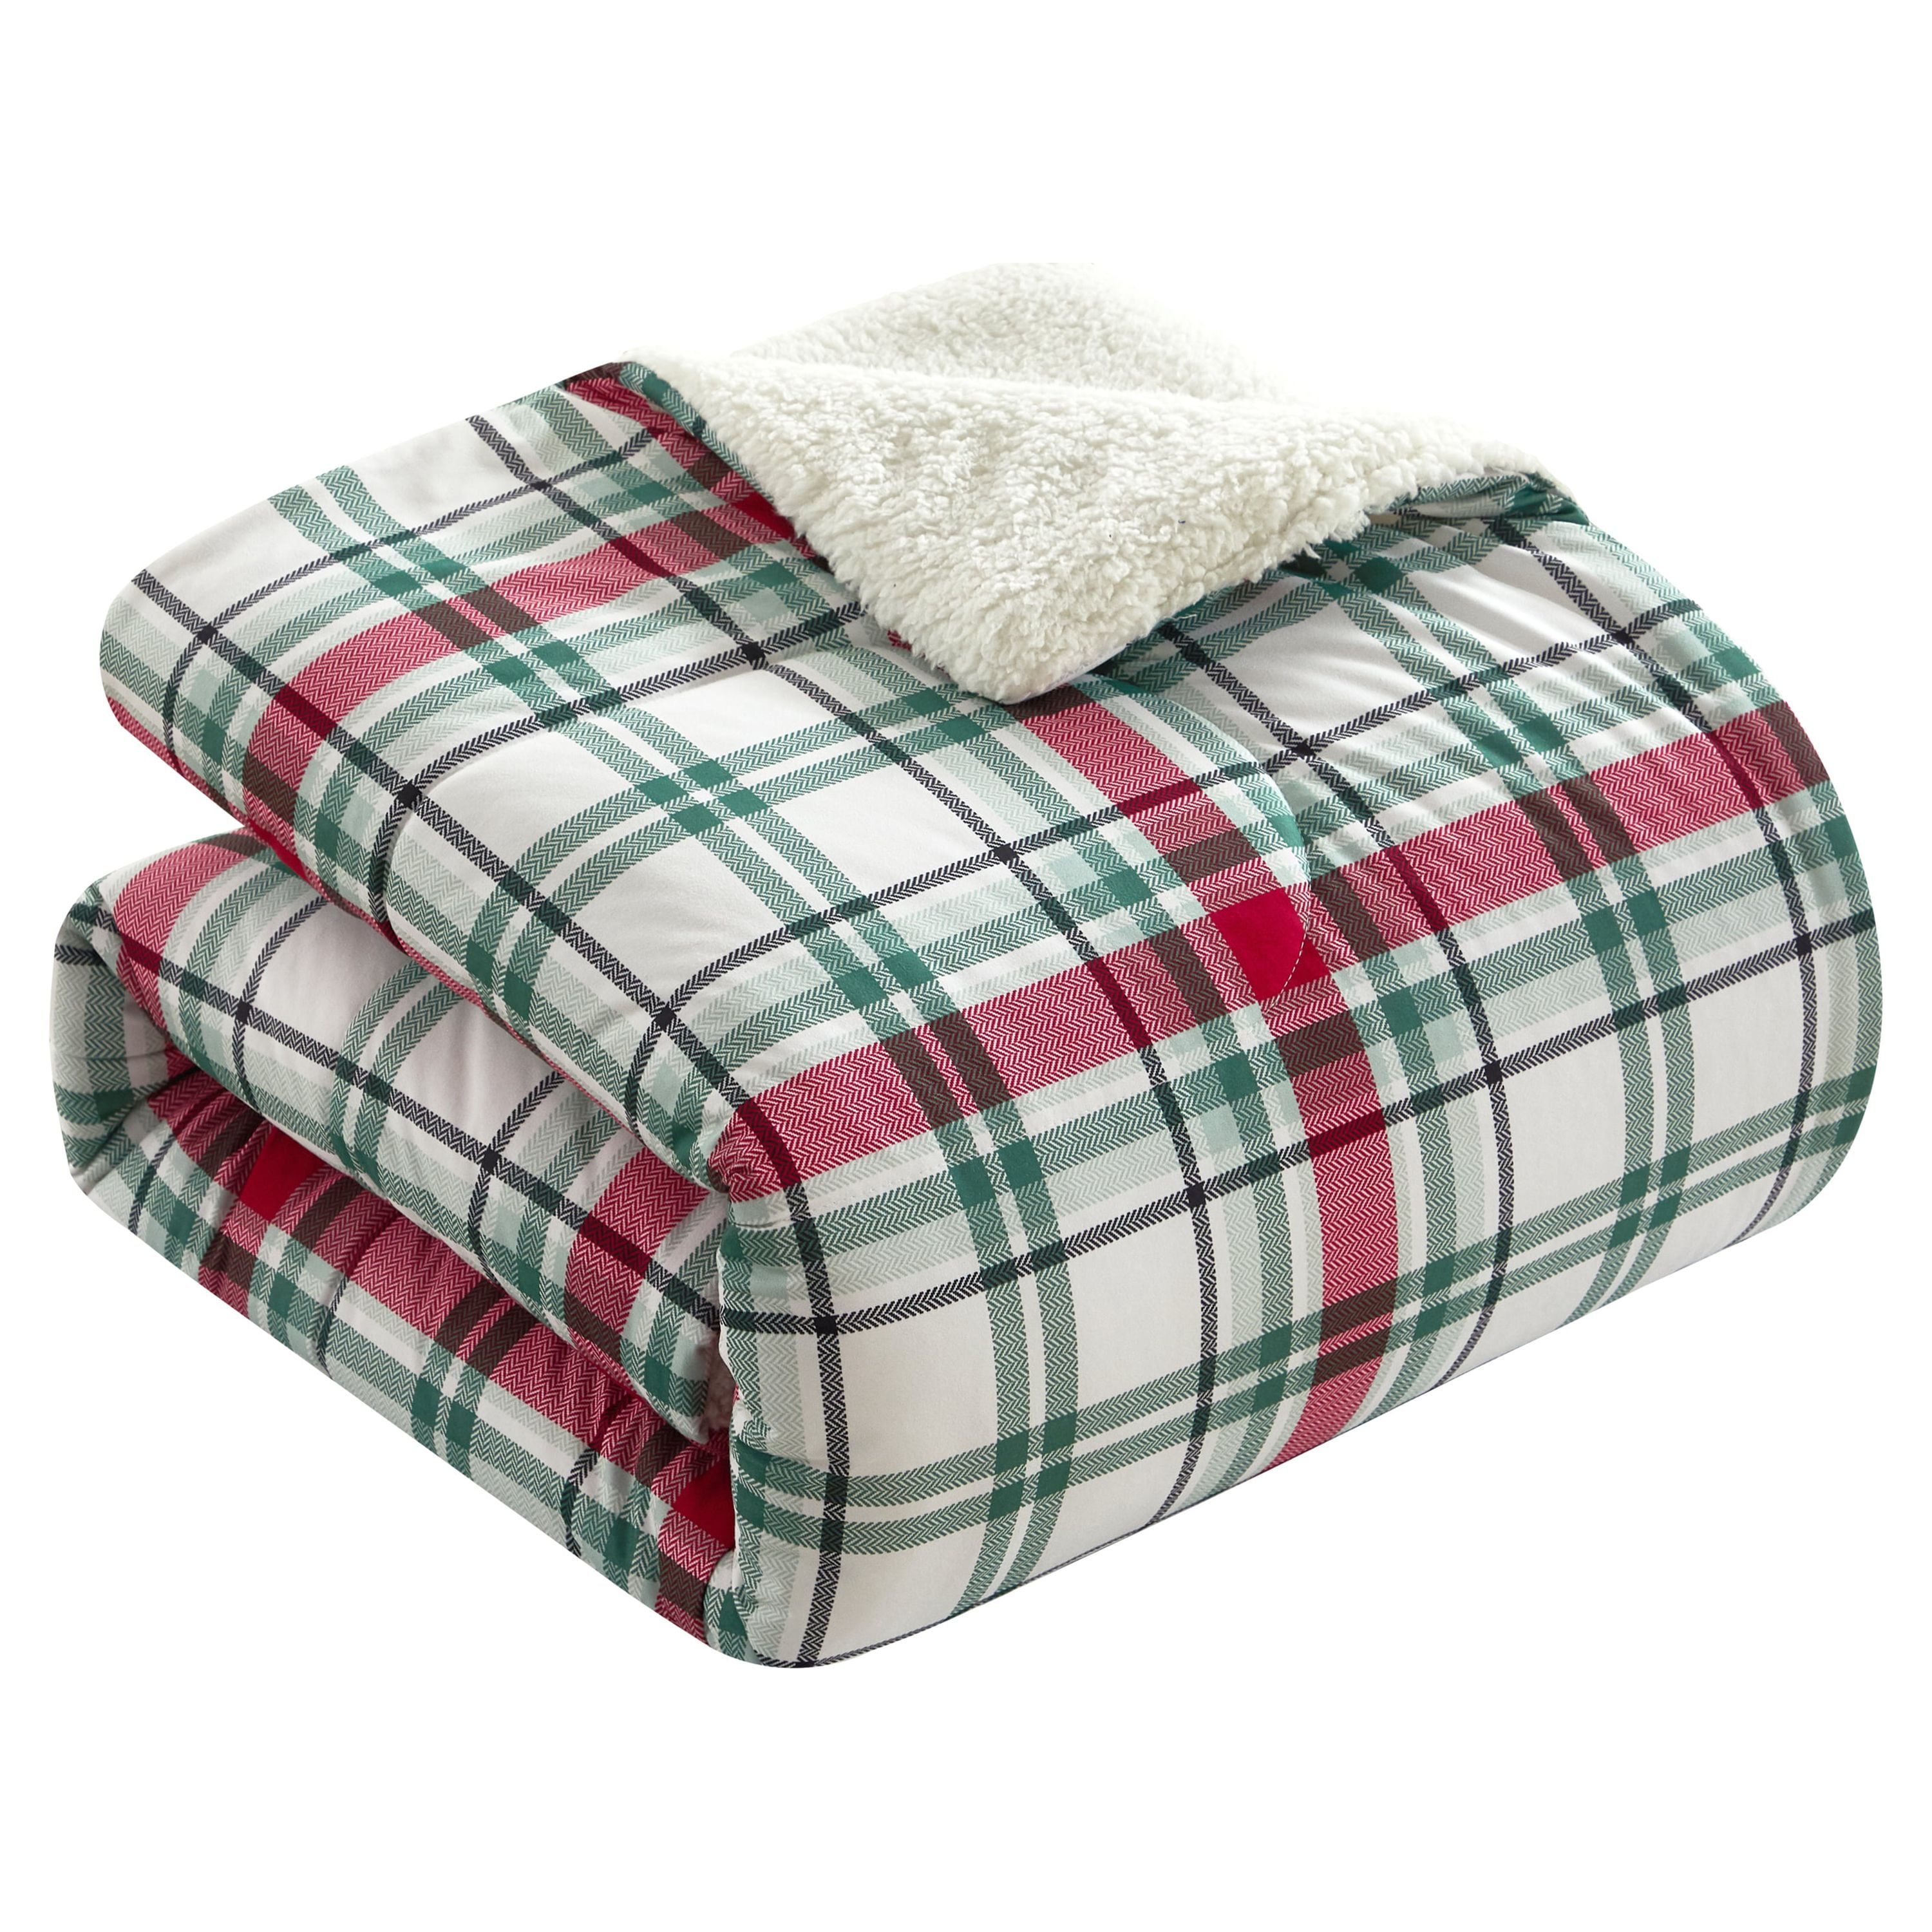  Swift Home Luxurious Ultra-Soft Flannel Plush Plaid & Sherpa 3  Piece Reversible Comforter and Sham Set, Harper, King/Cal King (106x94),  Red : Home & Kitchen